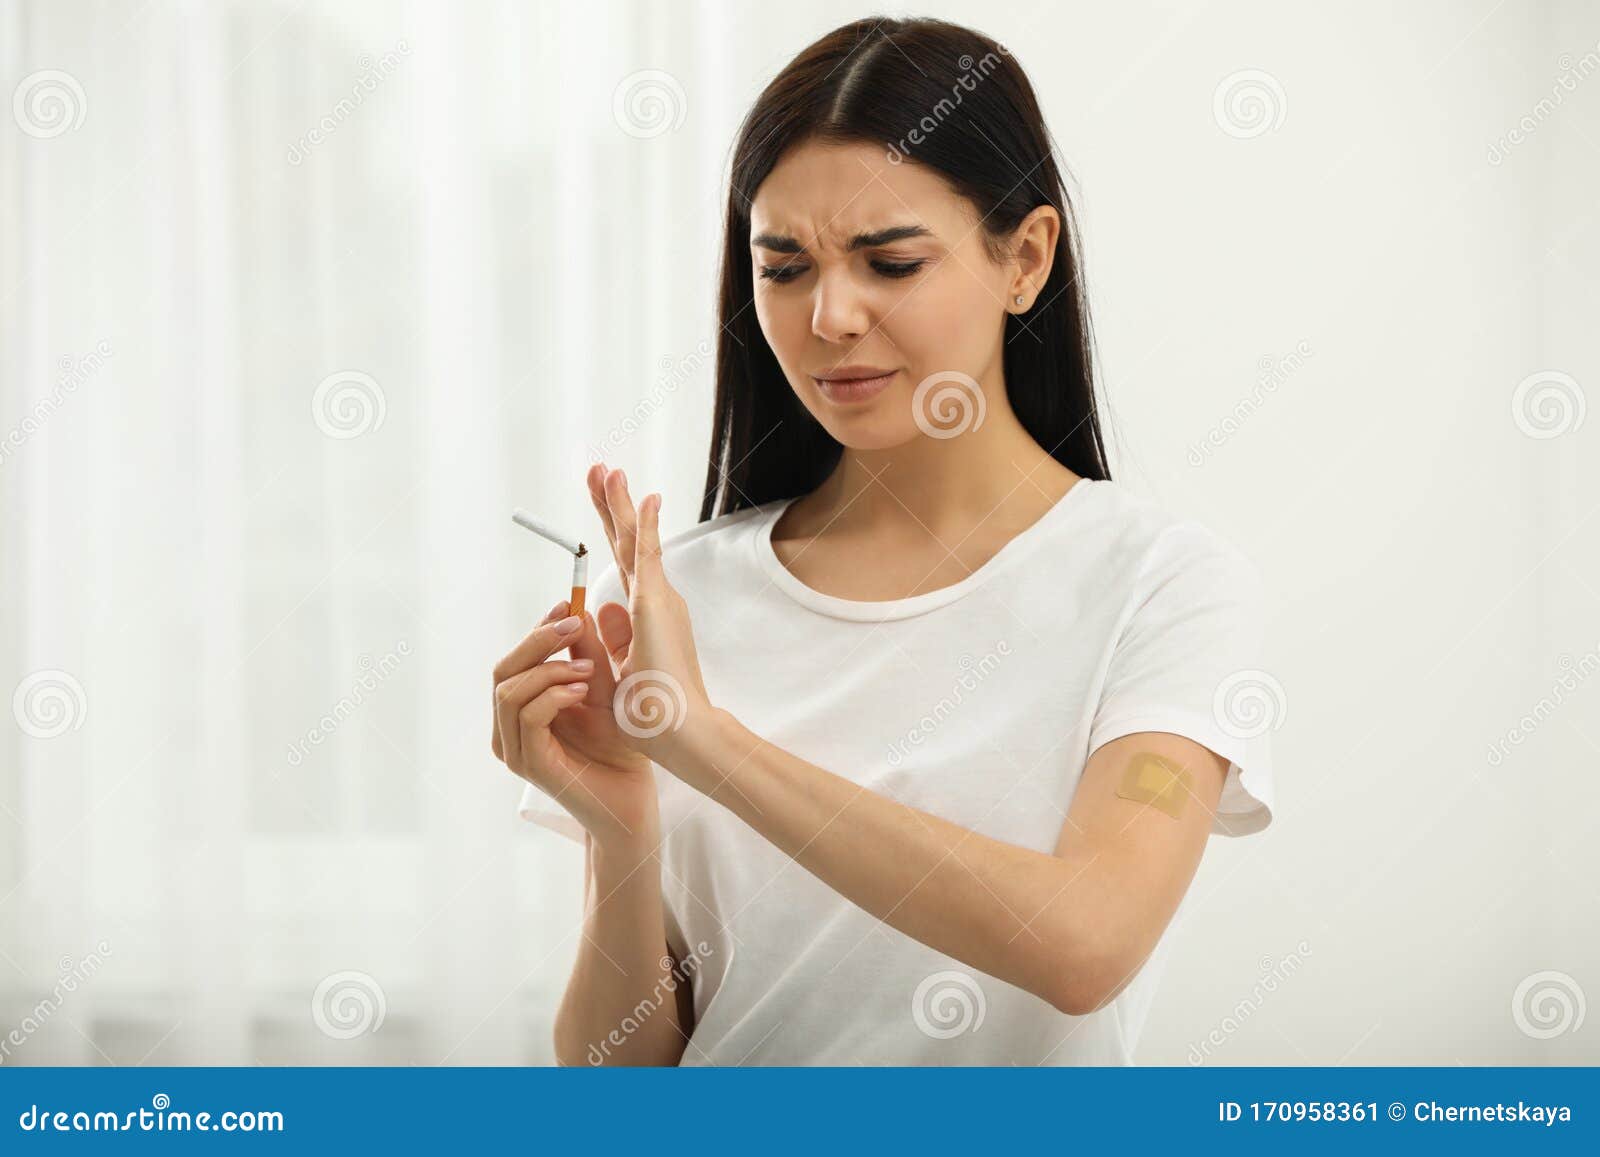 Emotional Young Woman With Nicotine Patch And Cigarette Stock Image